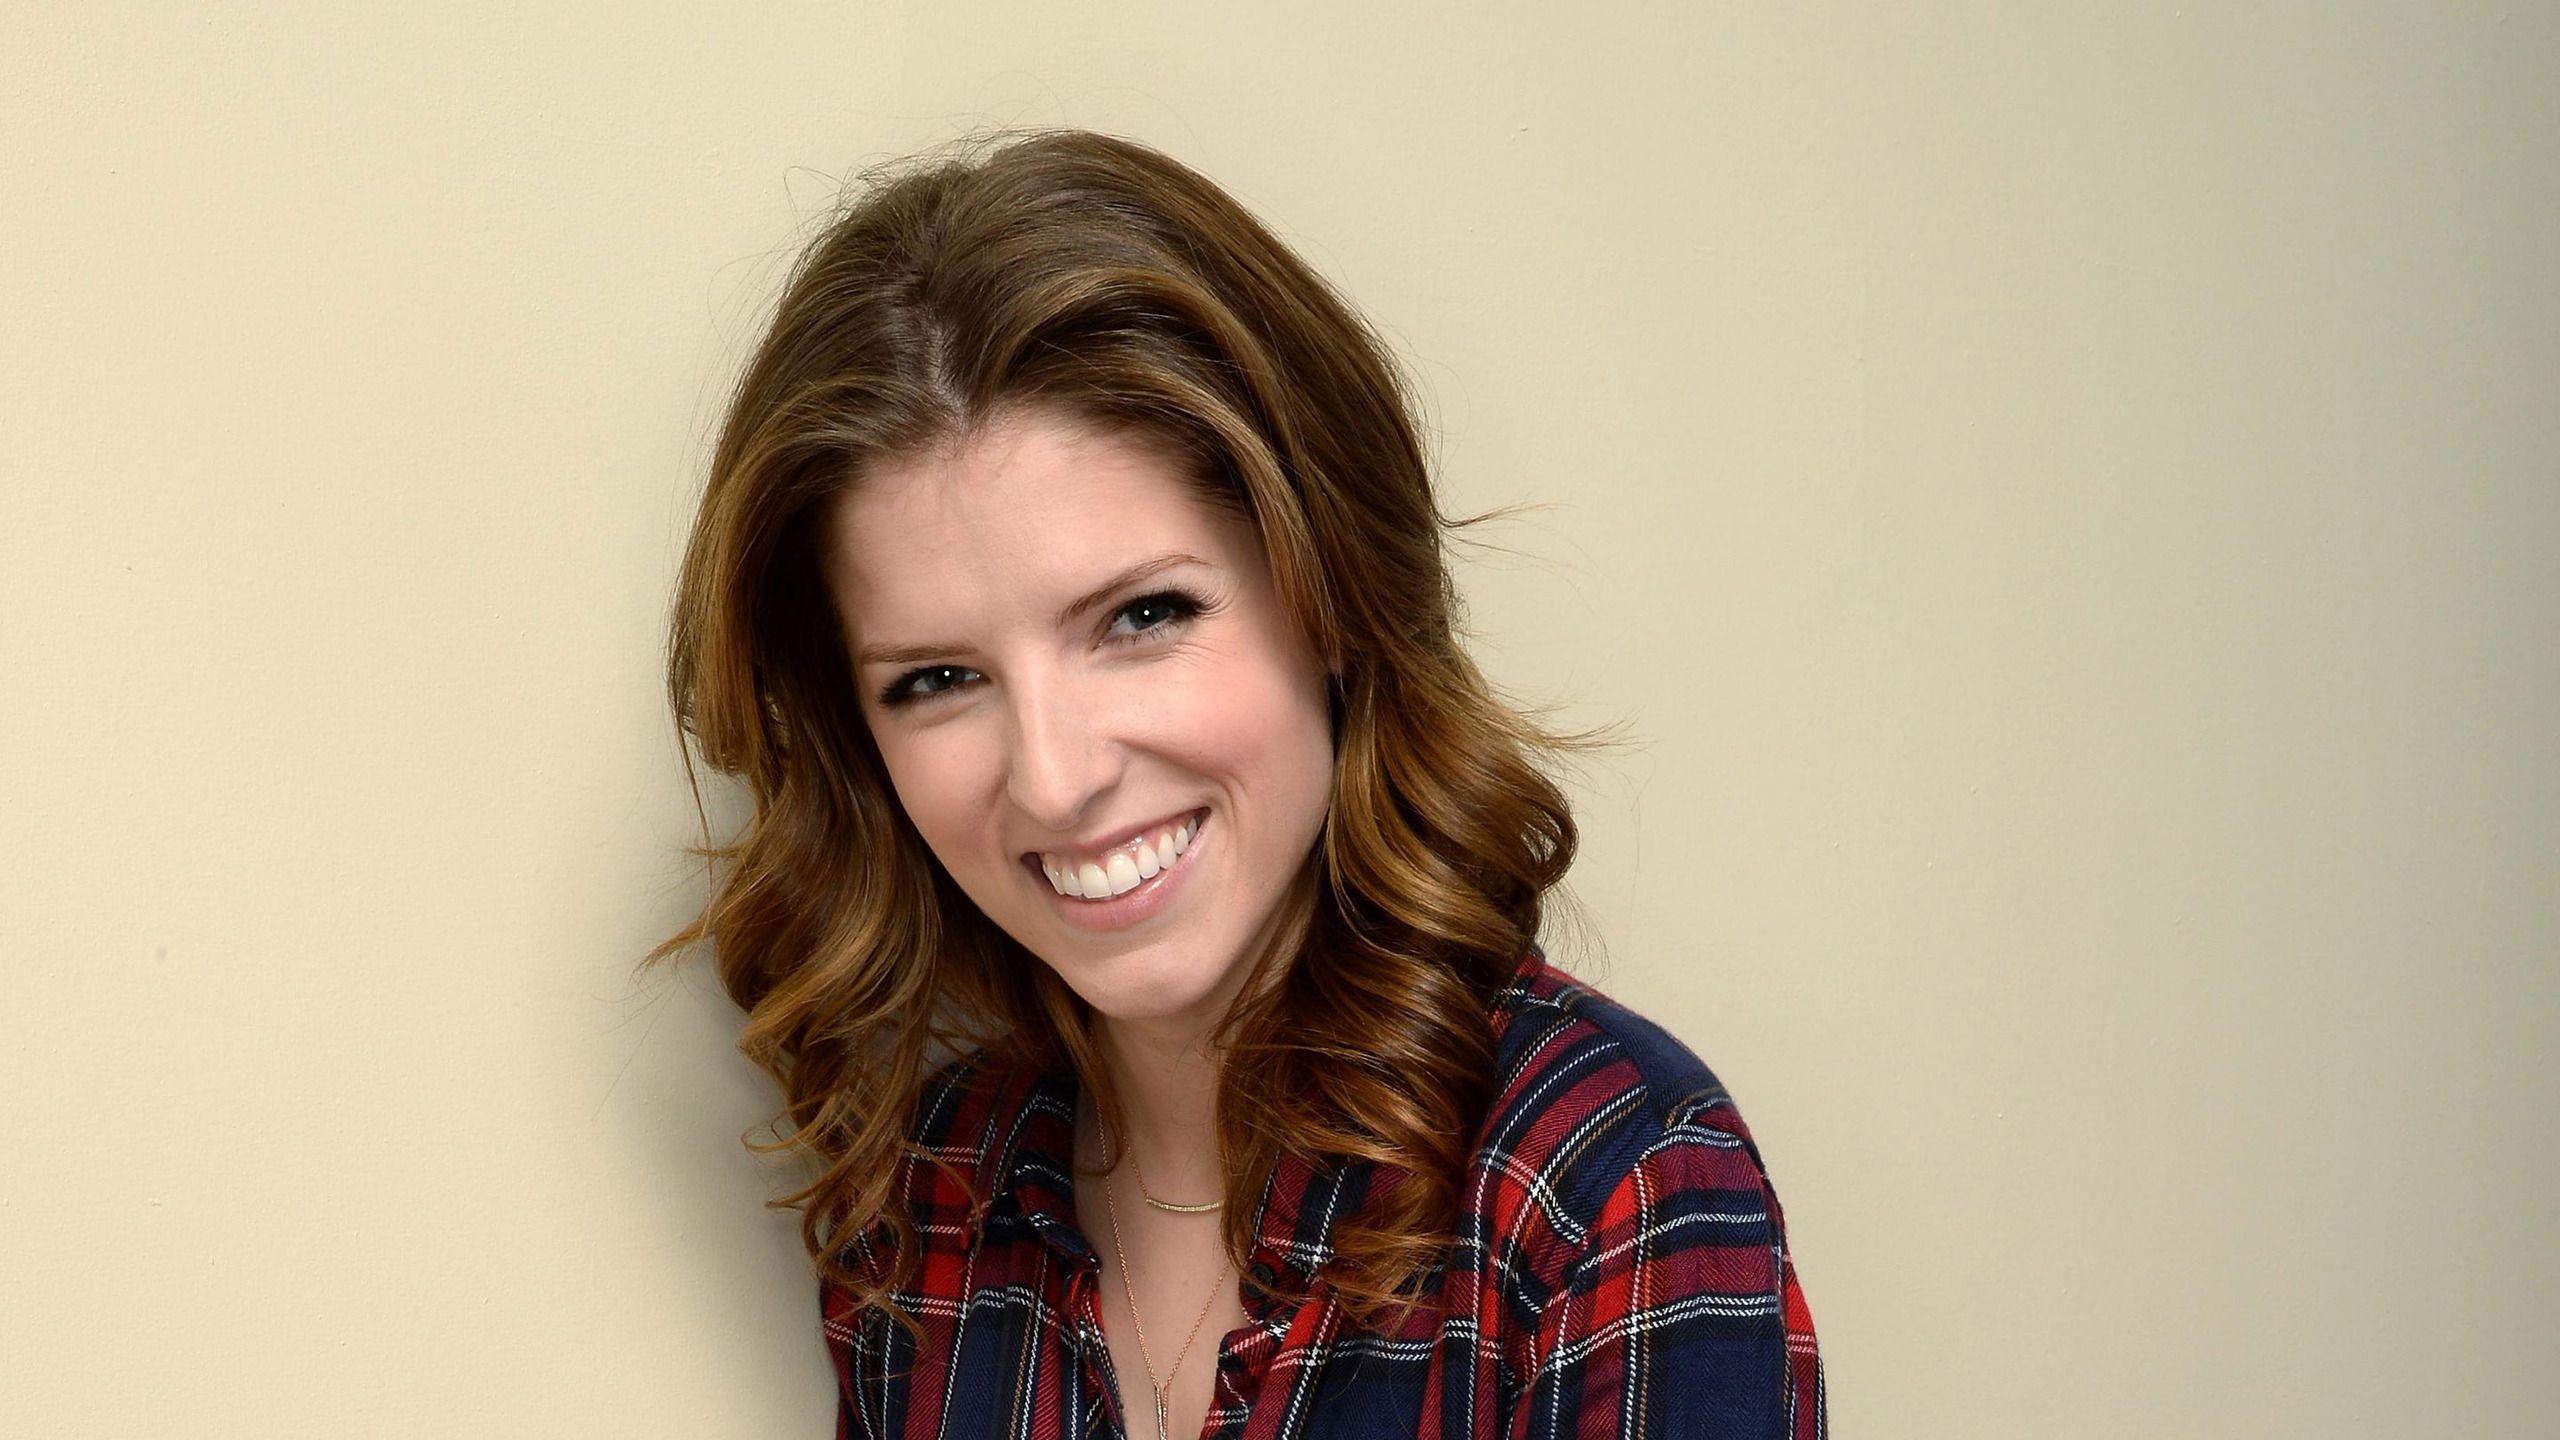 Anna Kendrick Wallpaper Image Photo Picture Background